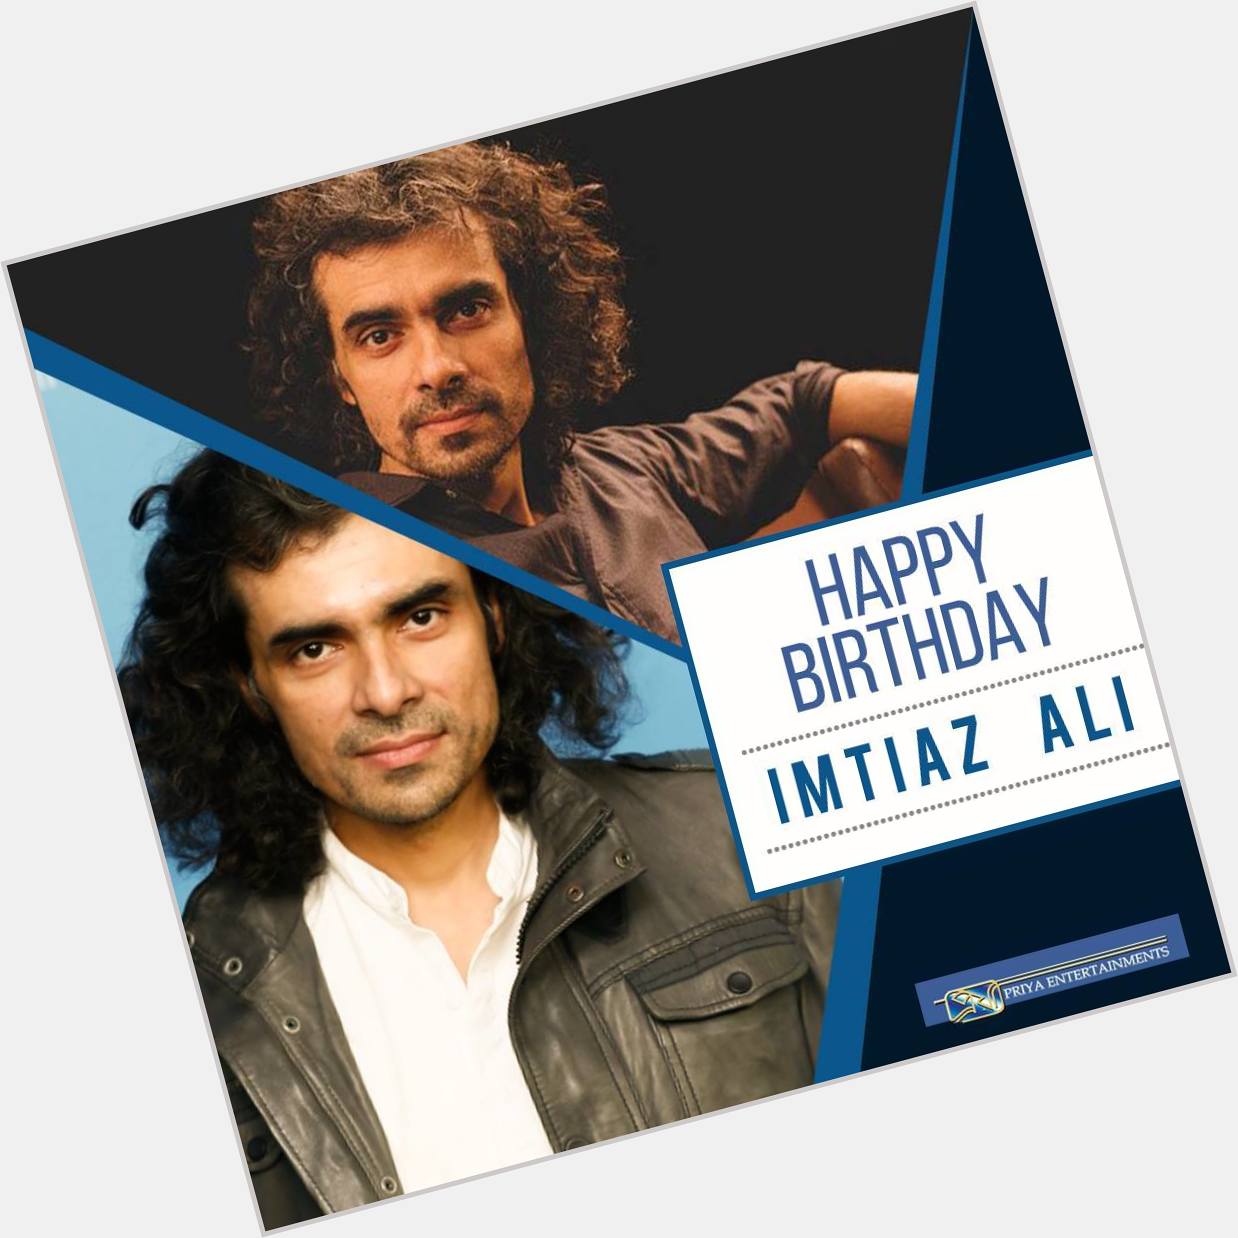 To the man who changed the narrative of love stories in modern cinema we wish you a very Happy Birthday - Imtiaz Ali 